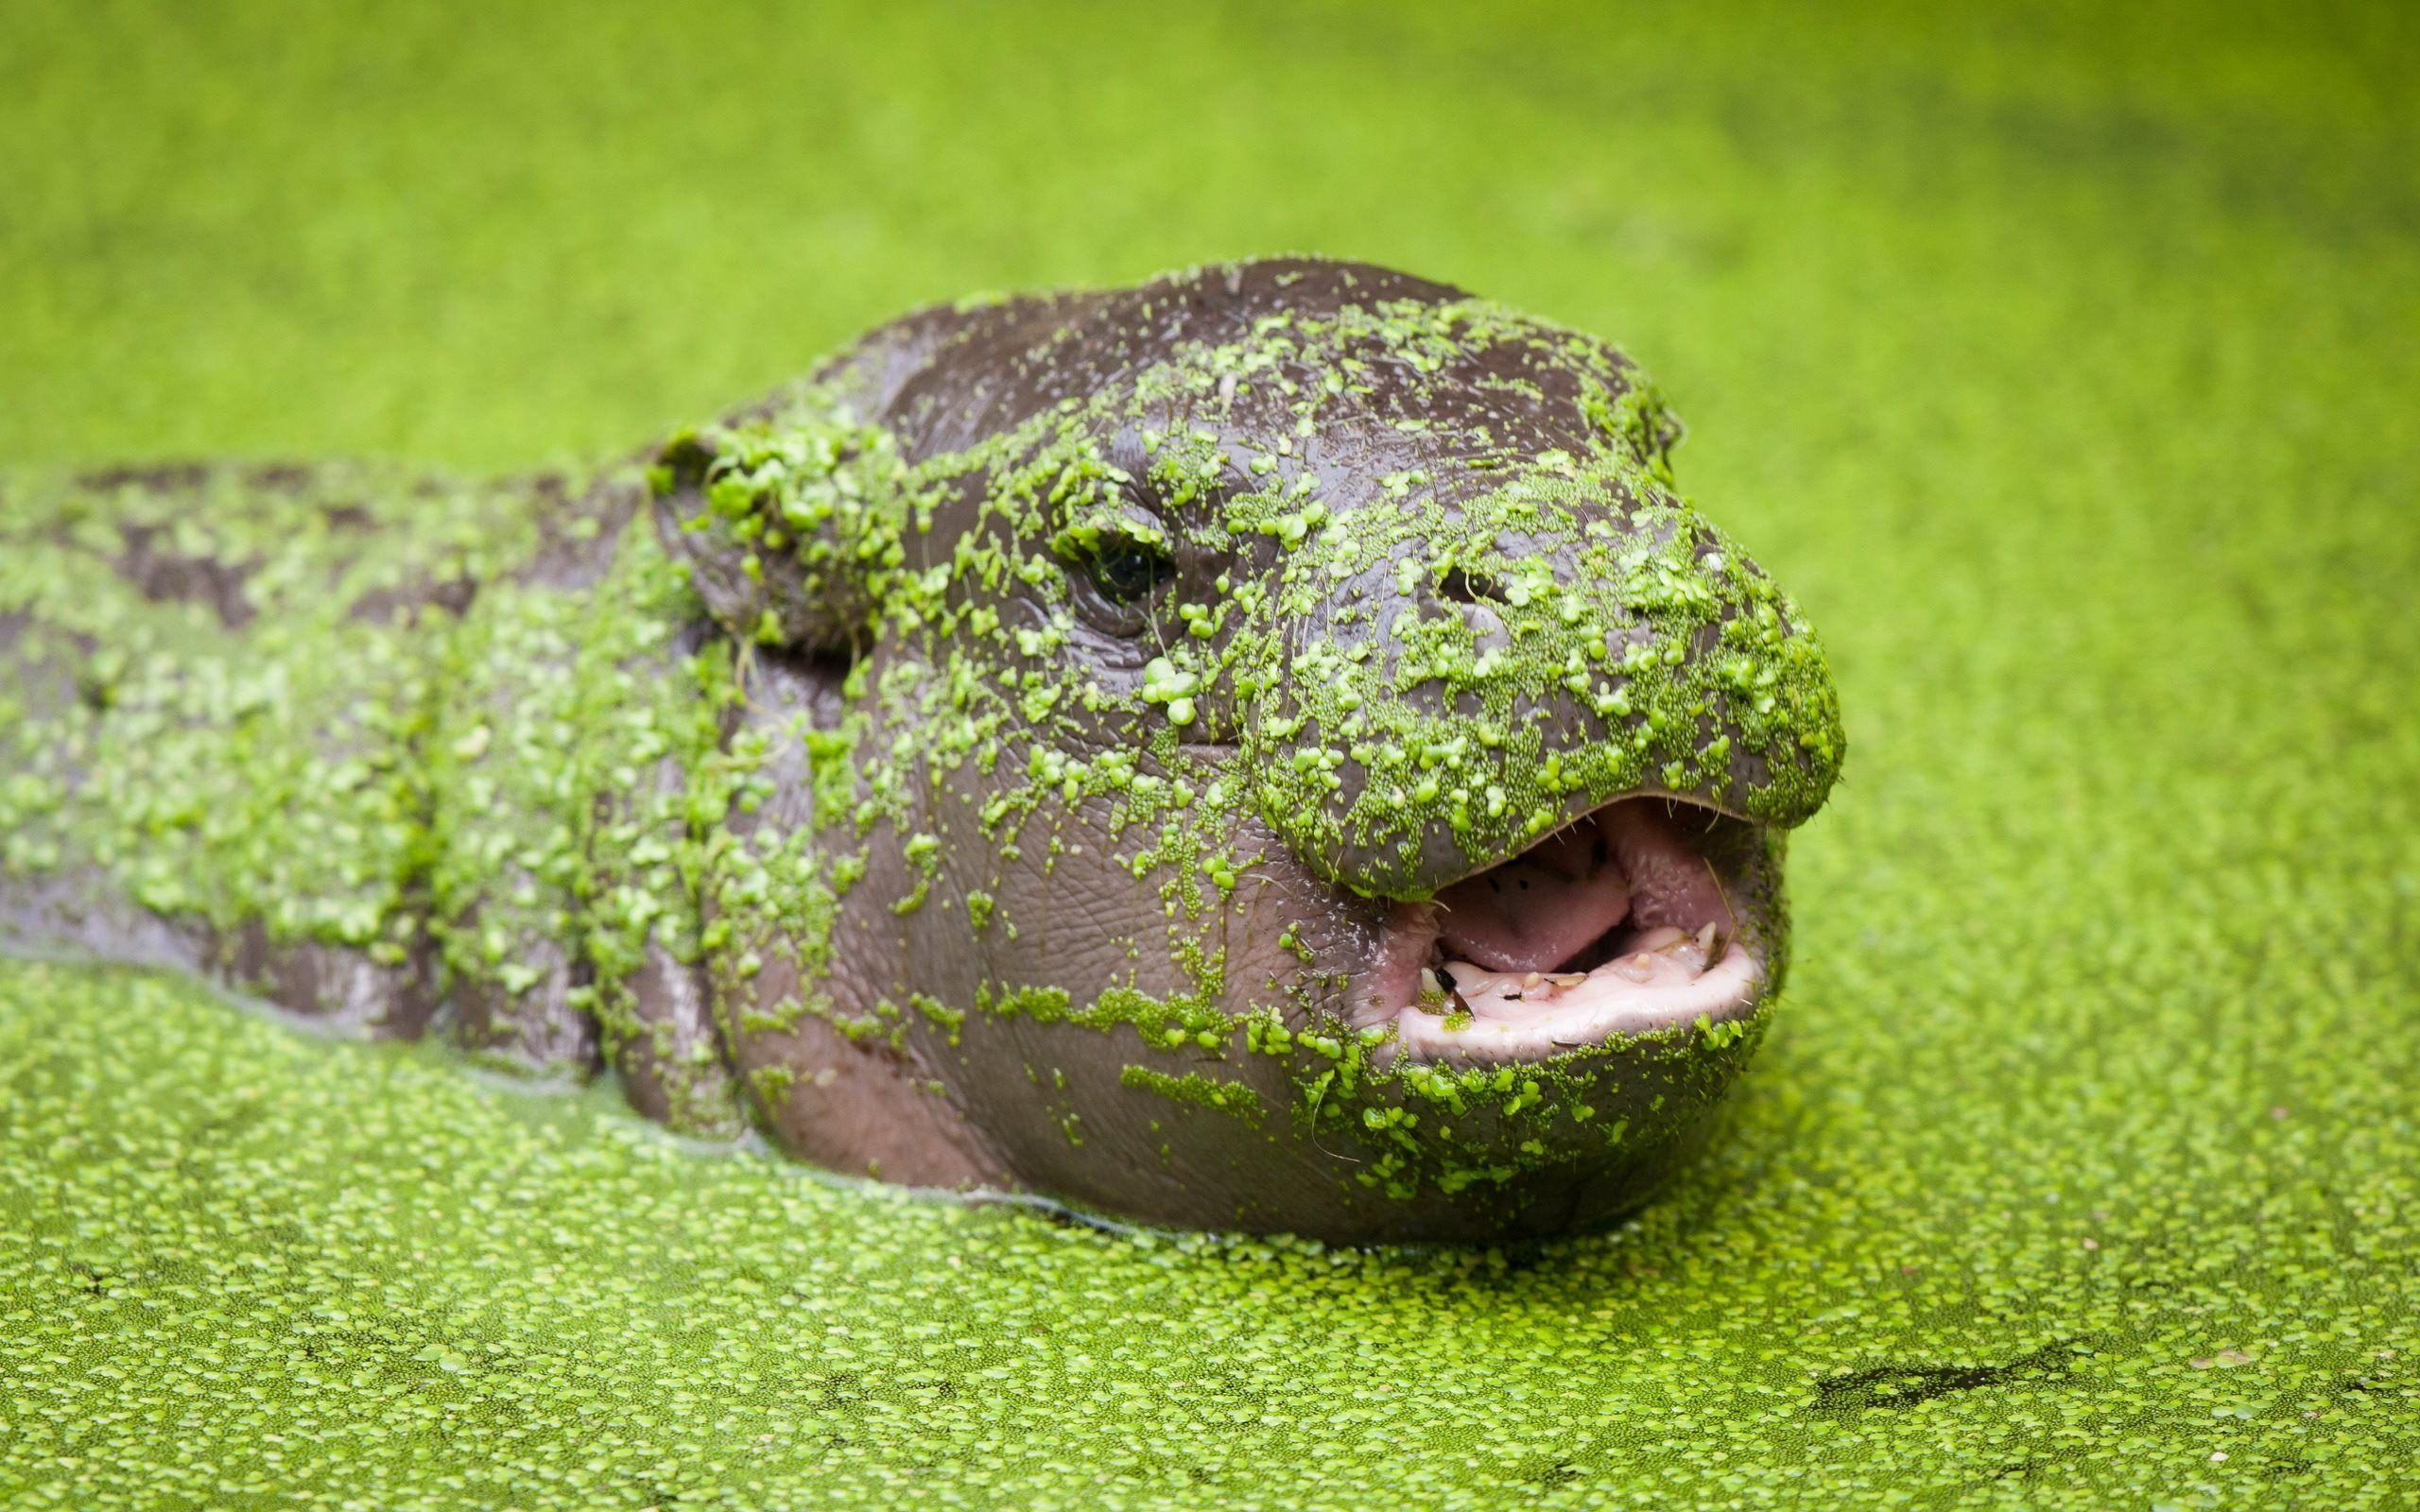 Download wallpaper pygmy hippo, swamp for desktop with resolution